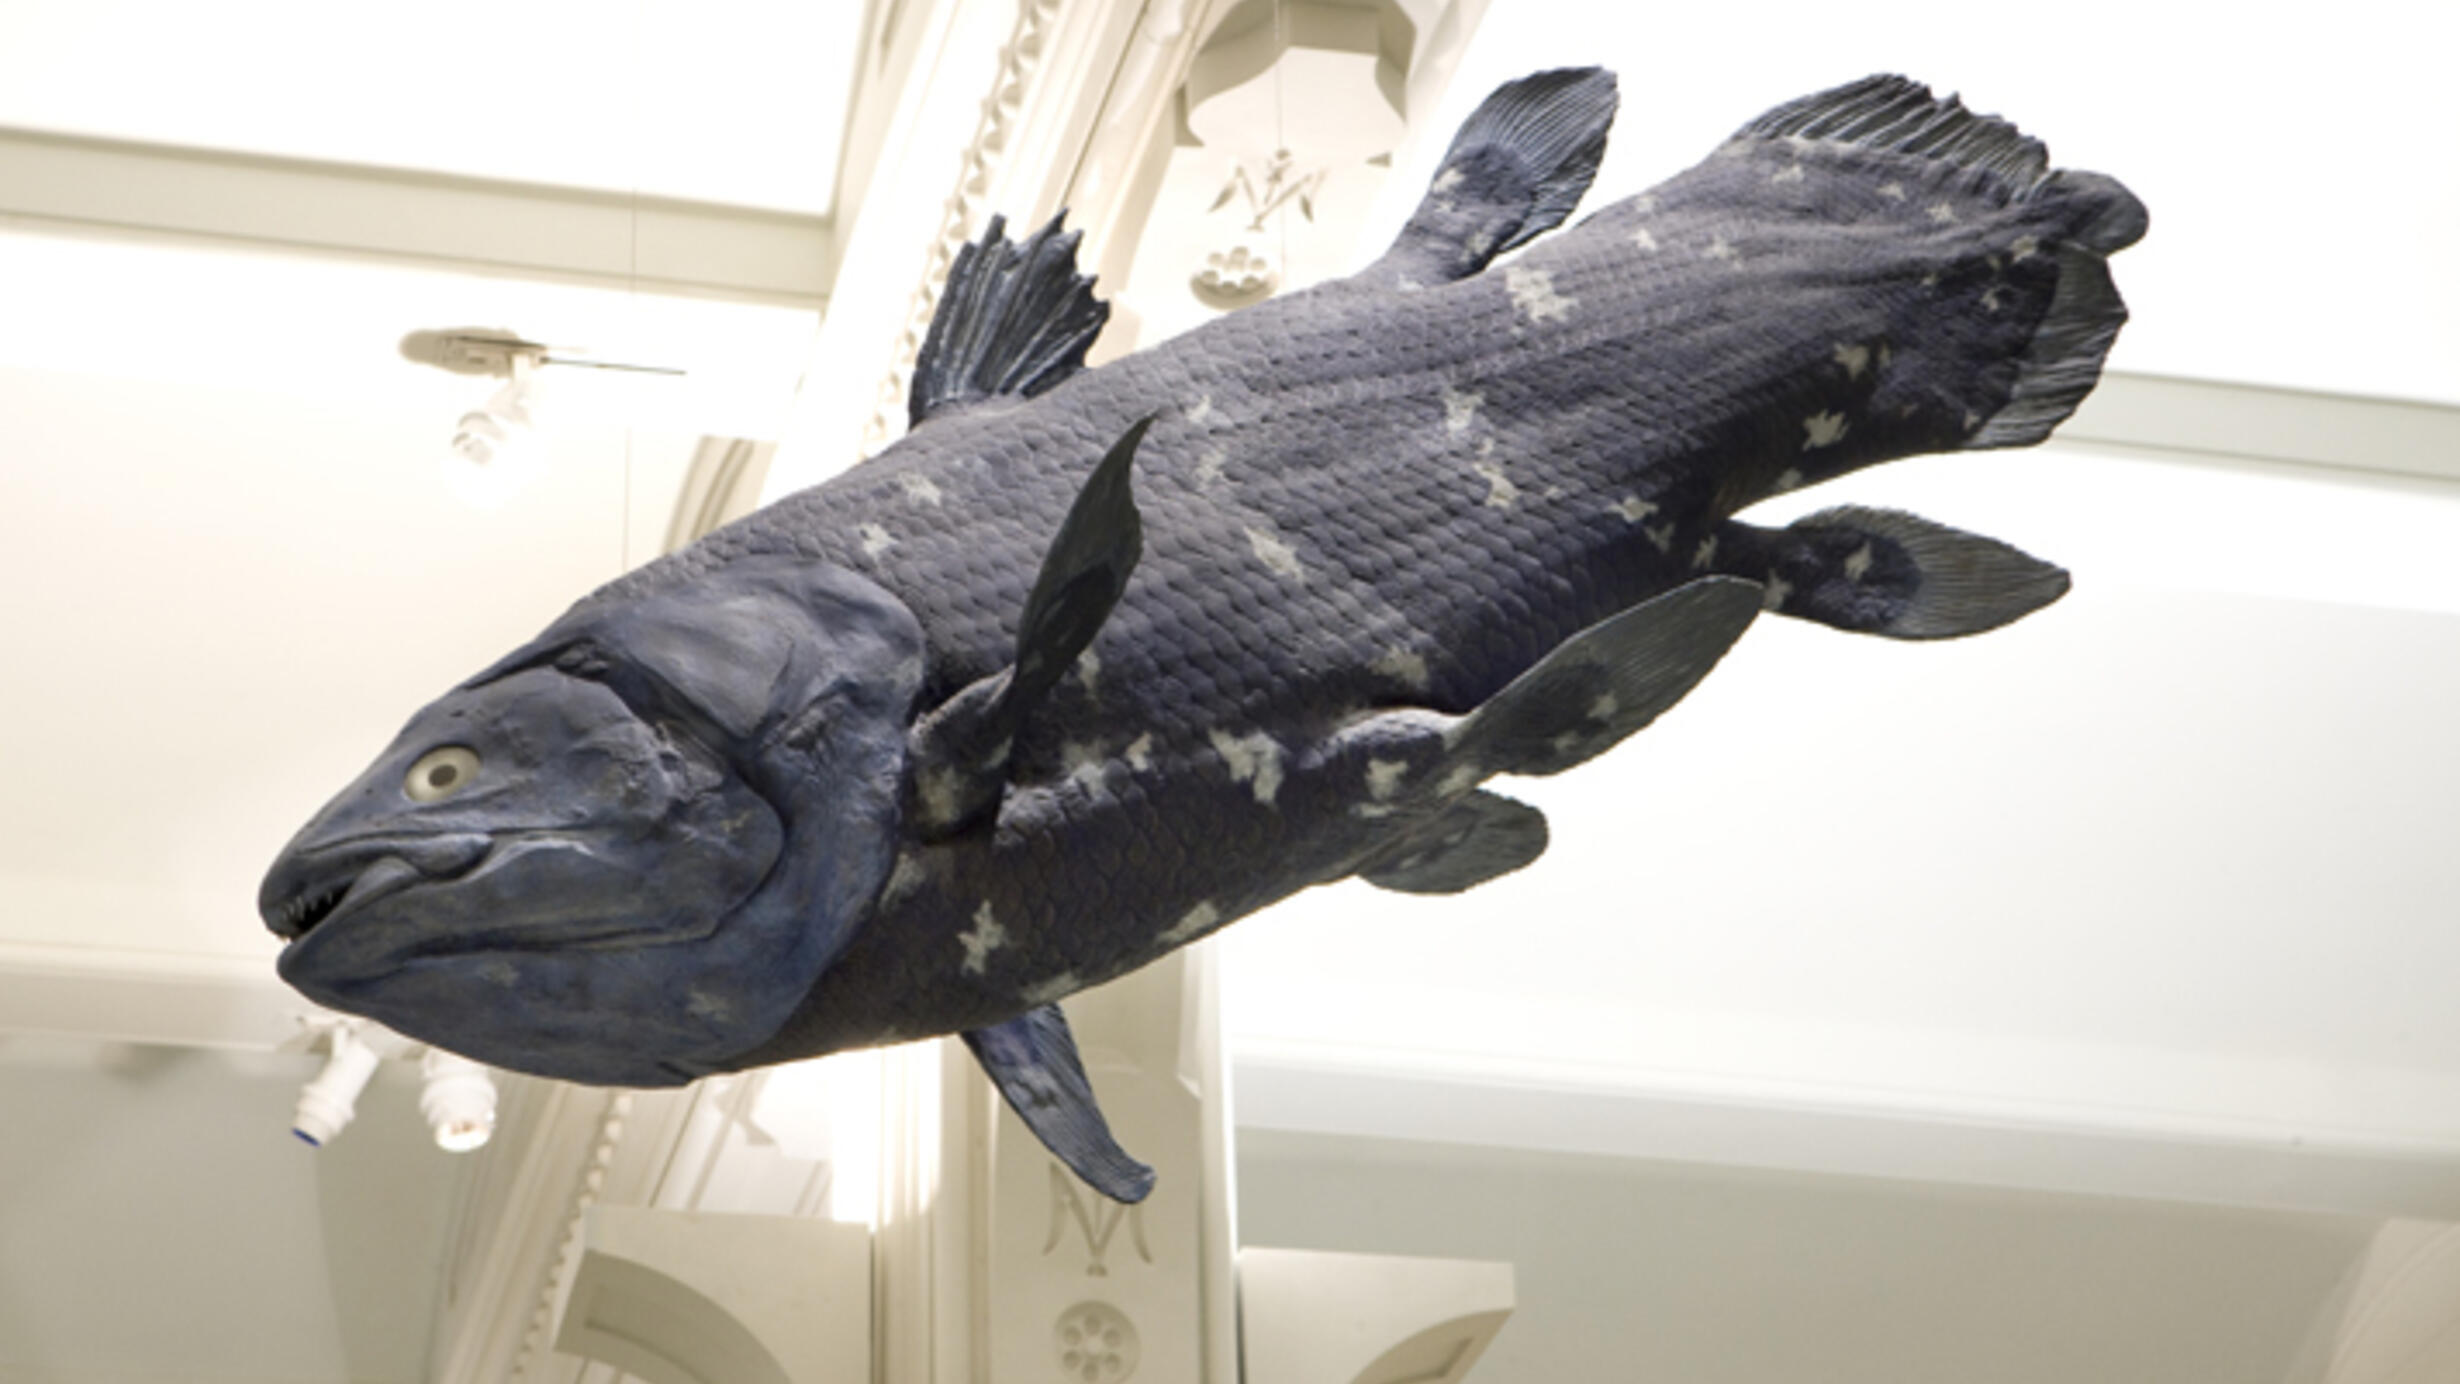 The model of a coelacanth suspended from the ceiling of the Hall of Vertebrate Origins shows its thick tail, multiple smaller lobe fins, and mouth with small sharp teeth.